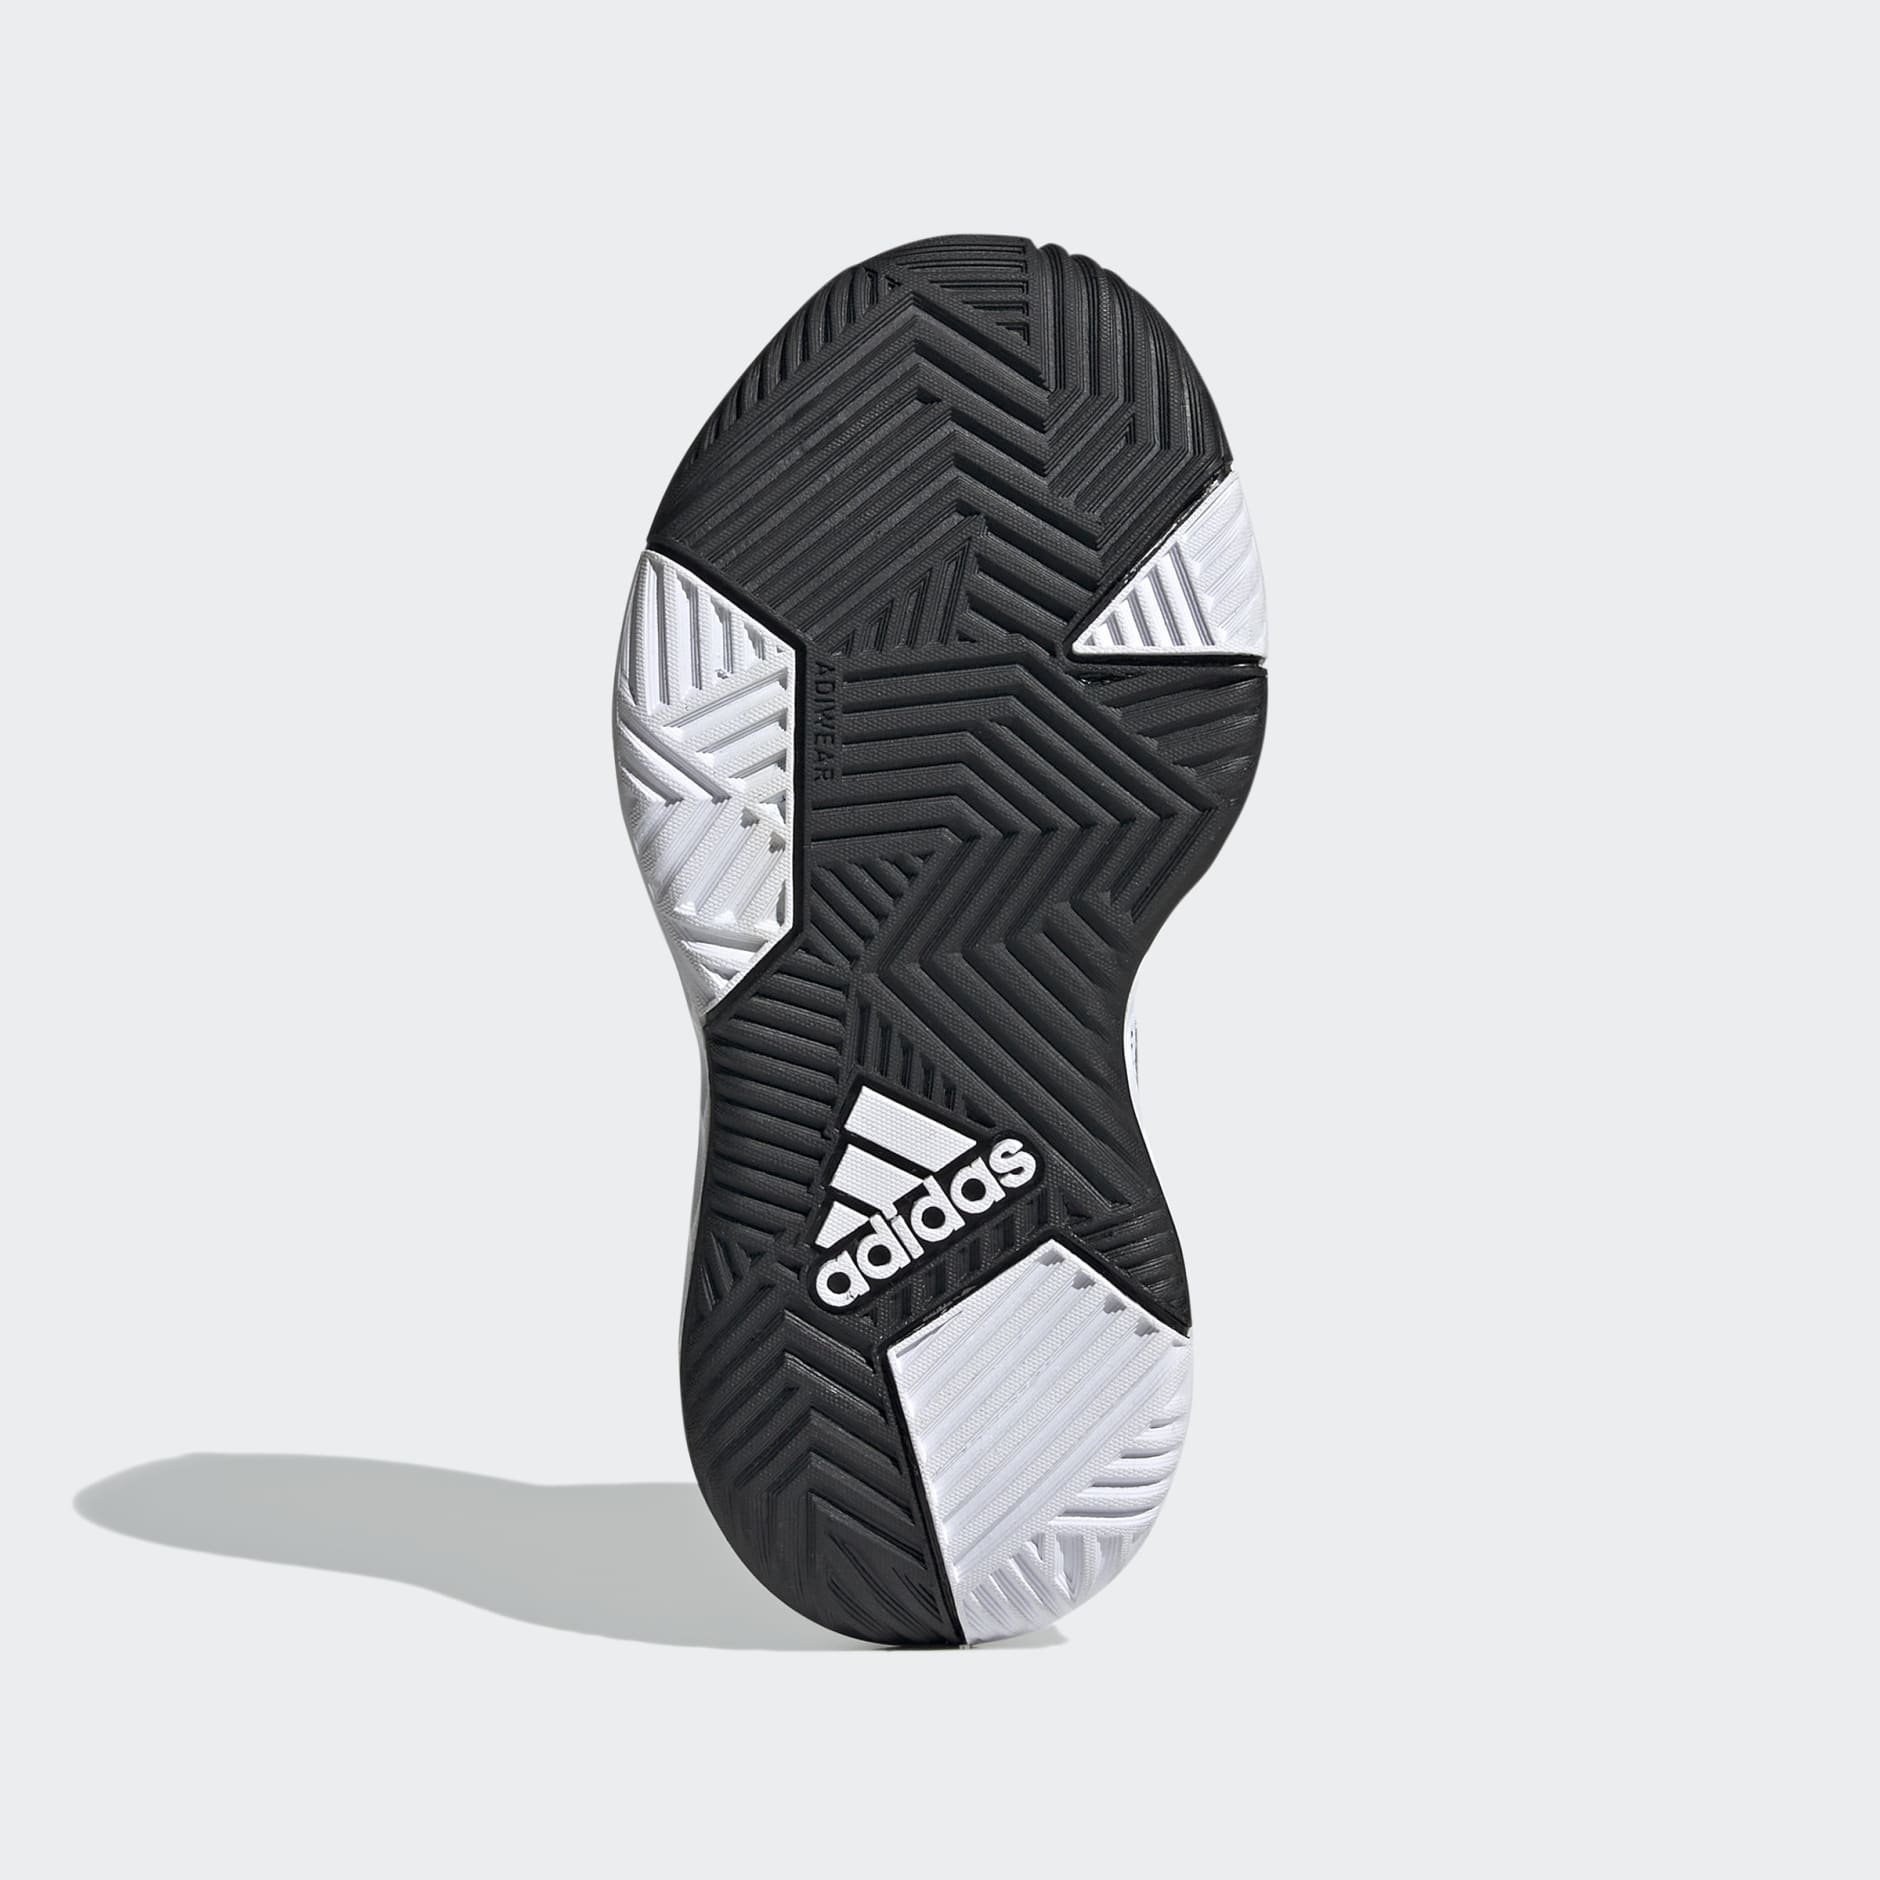 Shoes - Ownthegame 2.0 Shoes - Black | adidas South Africa